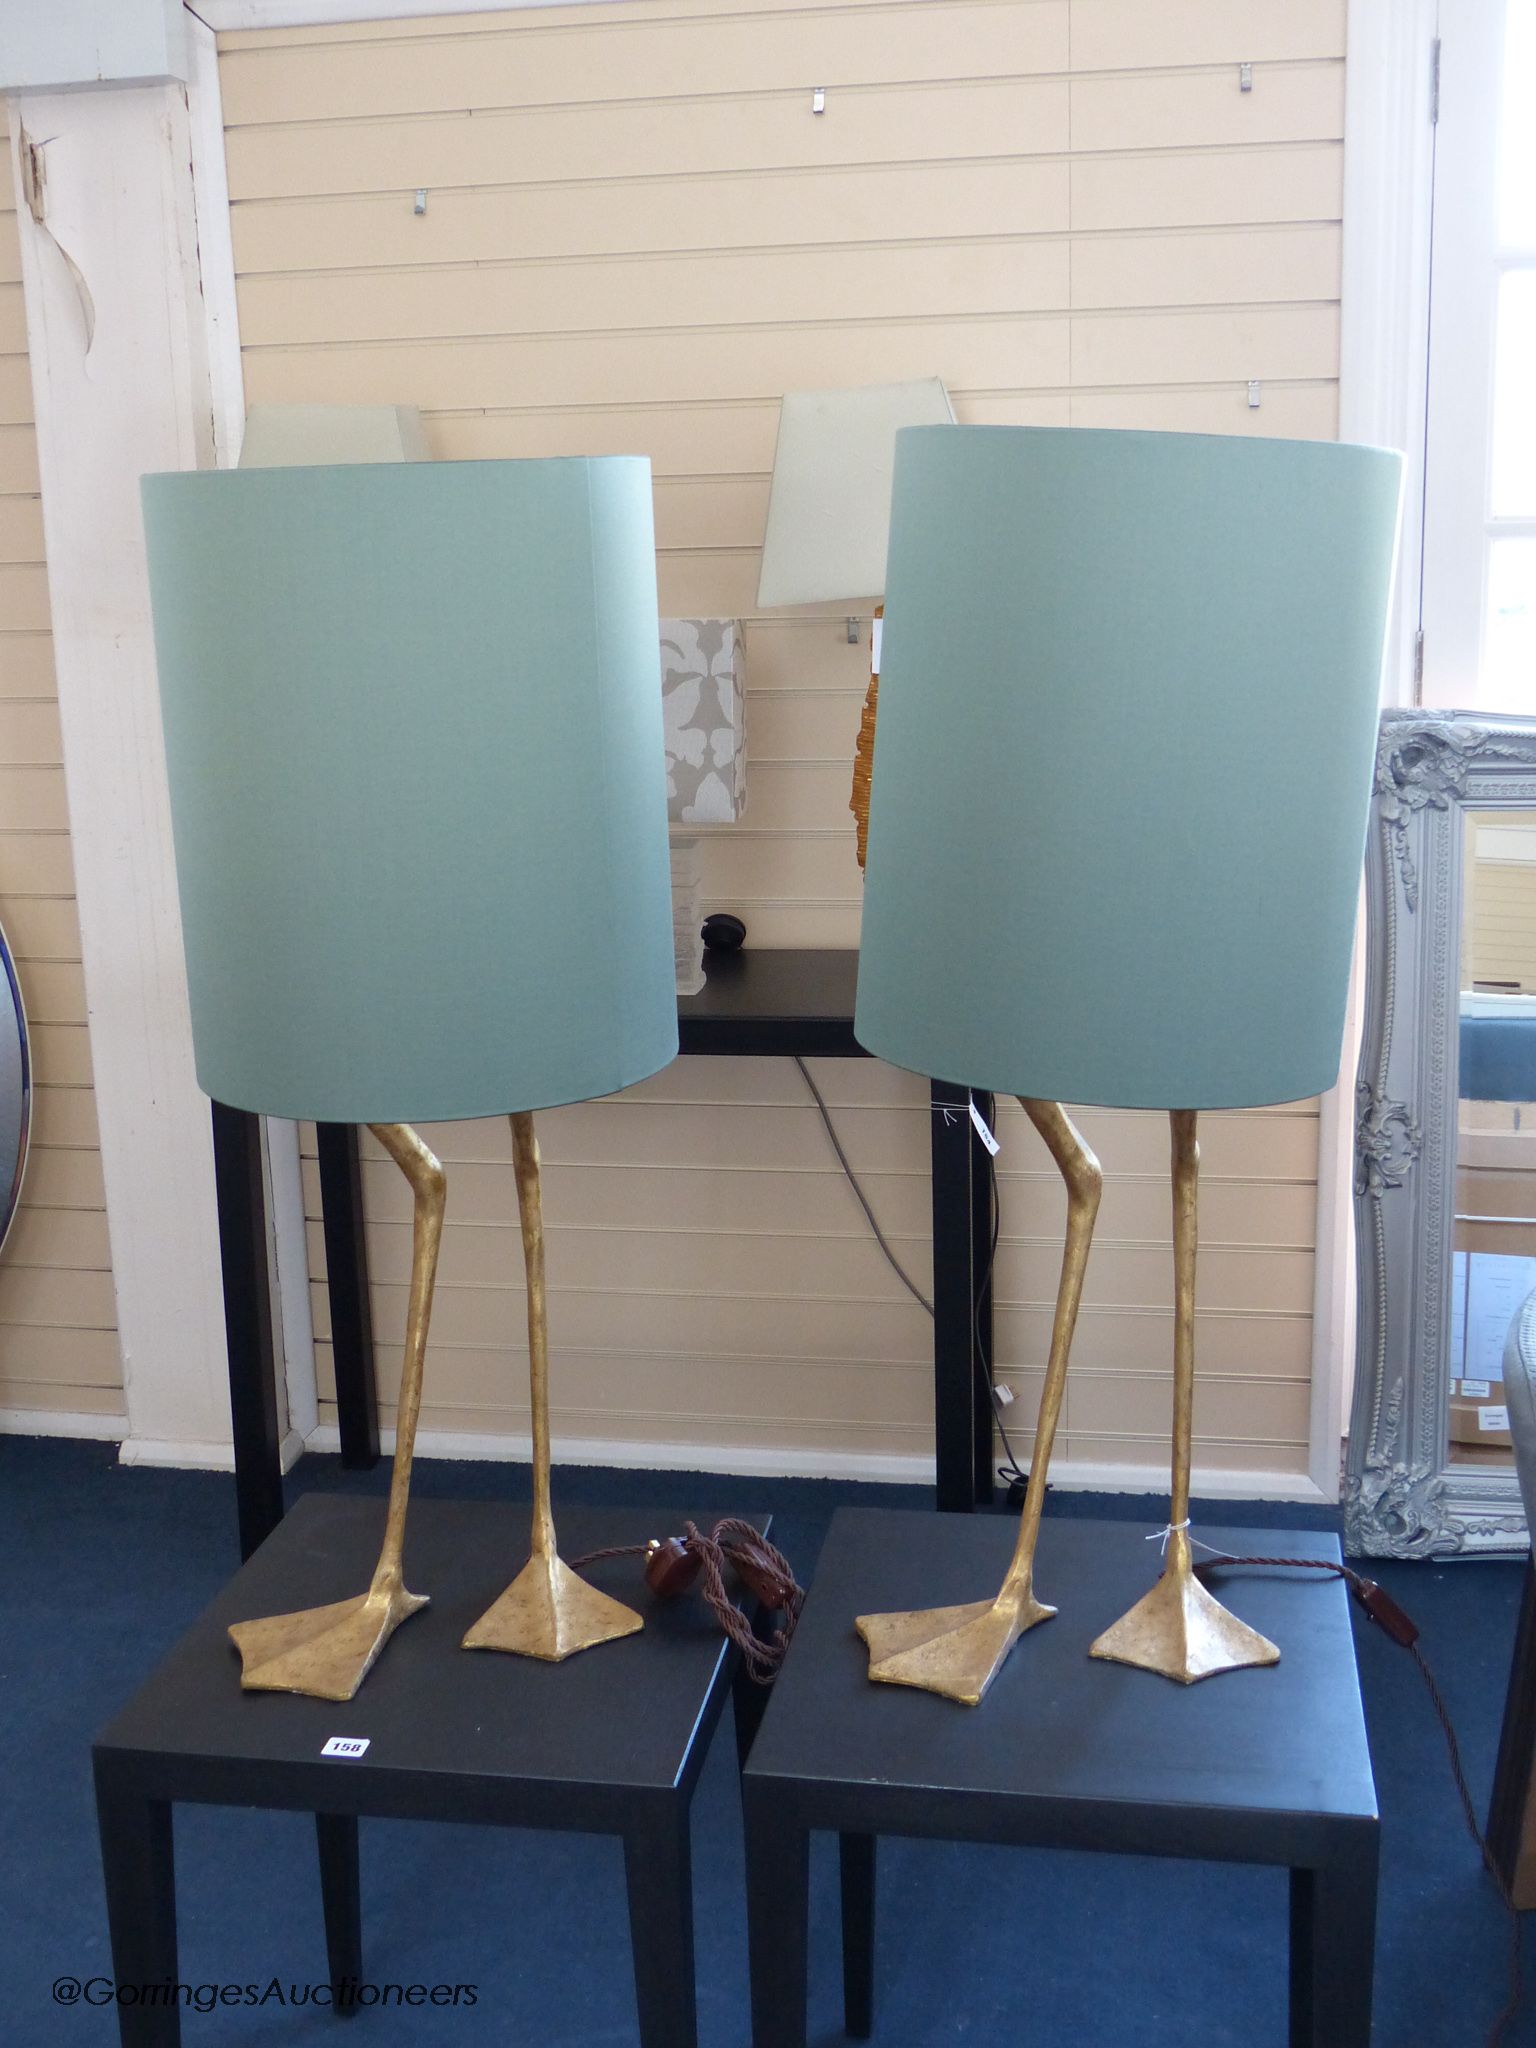 A pair of gilt composition 'goose leg' table lamps, duck egg shades, total height 93 cm